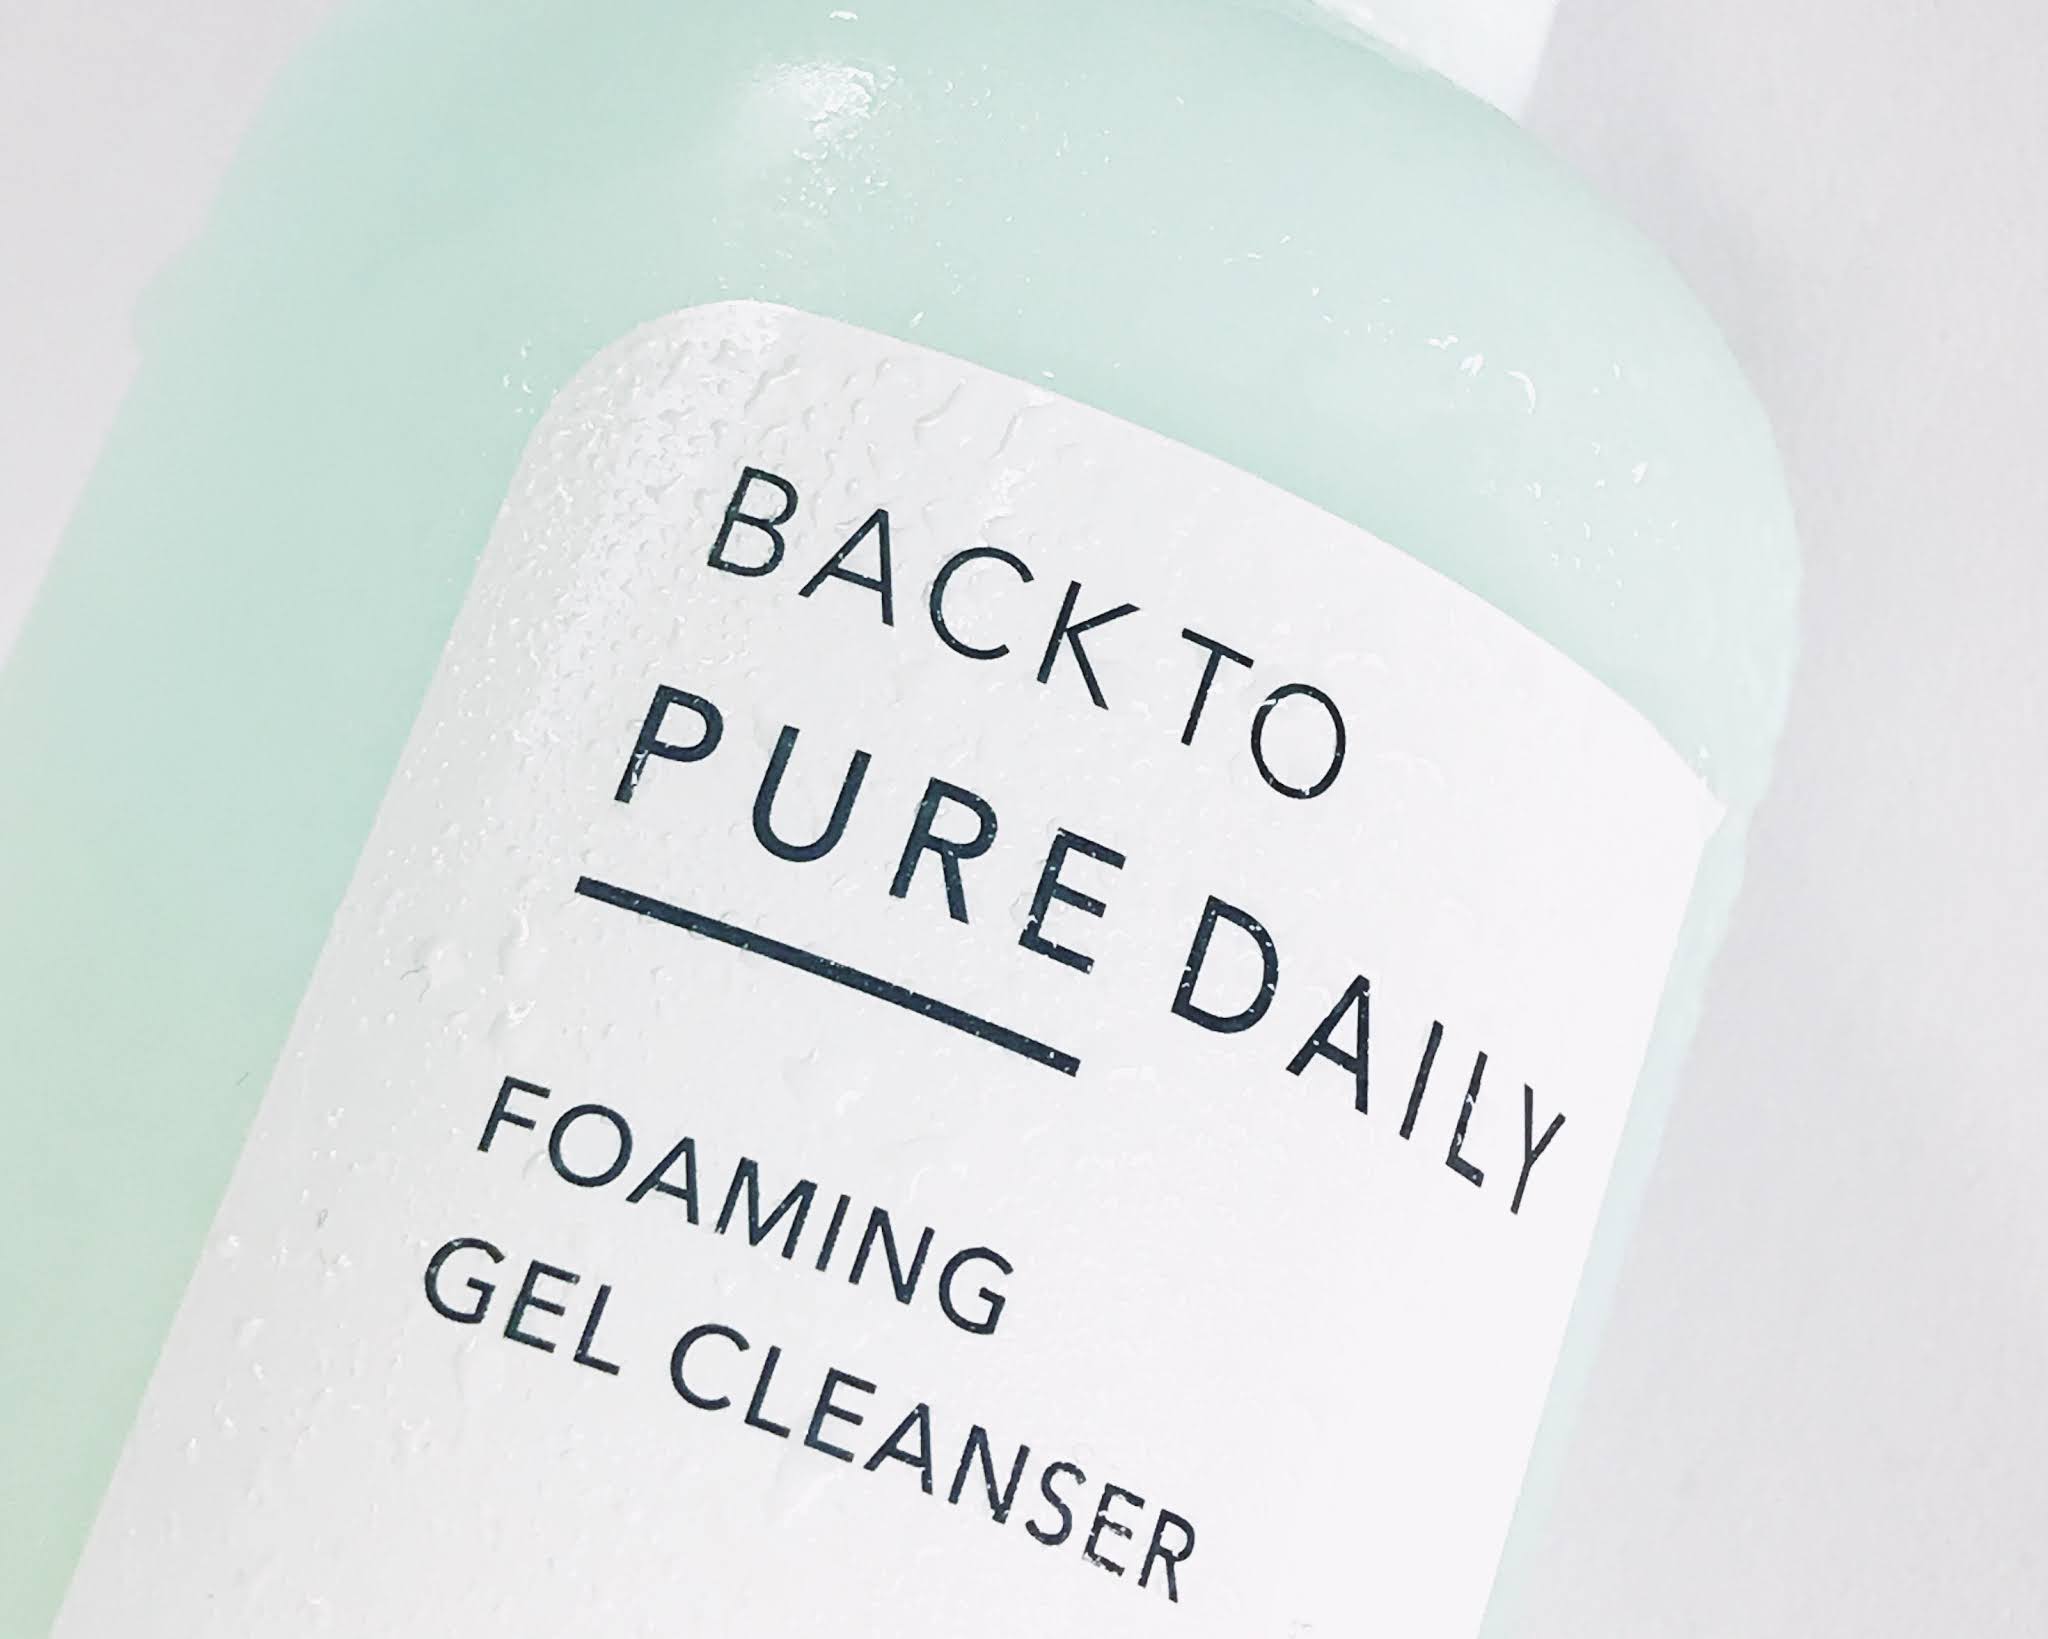 Back to Pure Daily Foaming Gel Cleanser. Thank you Farmer пилинг скатка. Soskin Foaming Cleansing Gel. Pure Cleansing Gel.